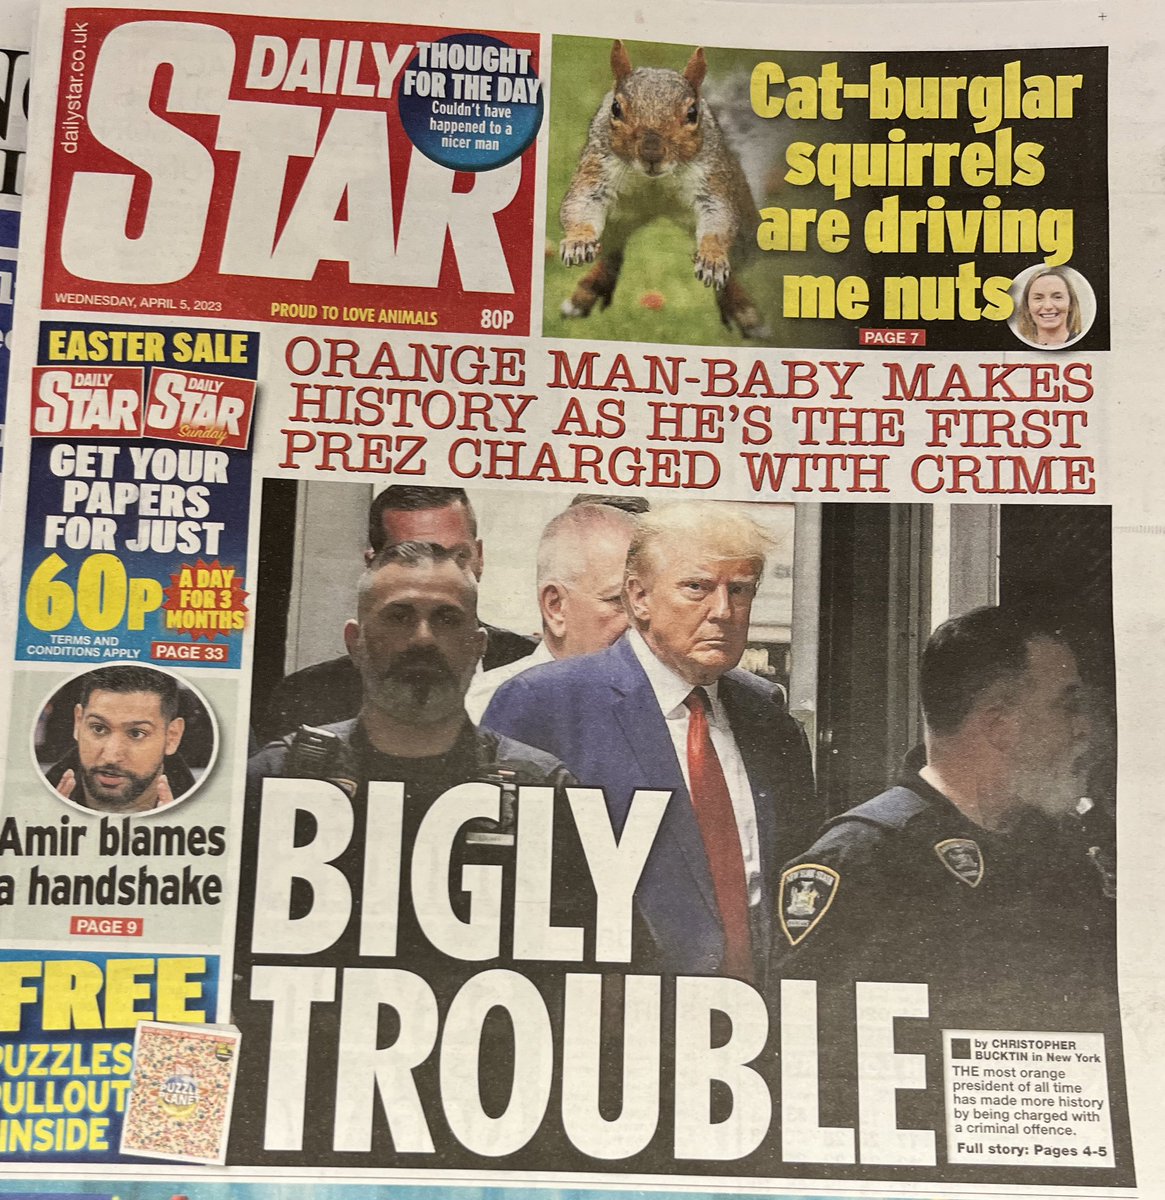 Quite good from the Daily Star today #TrumpArraignment